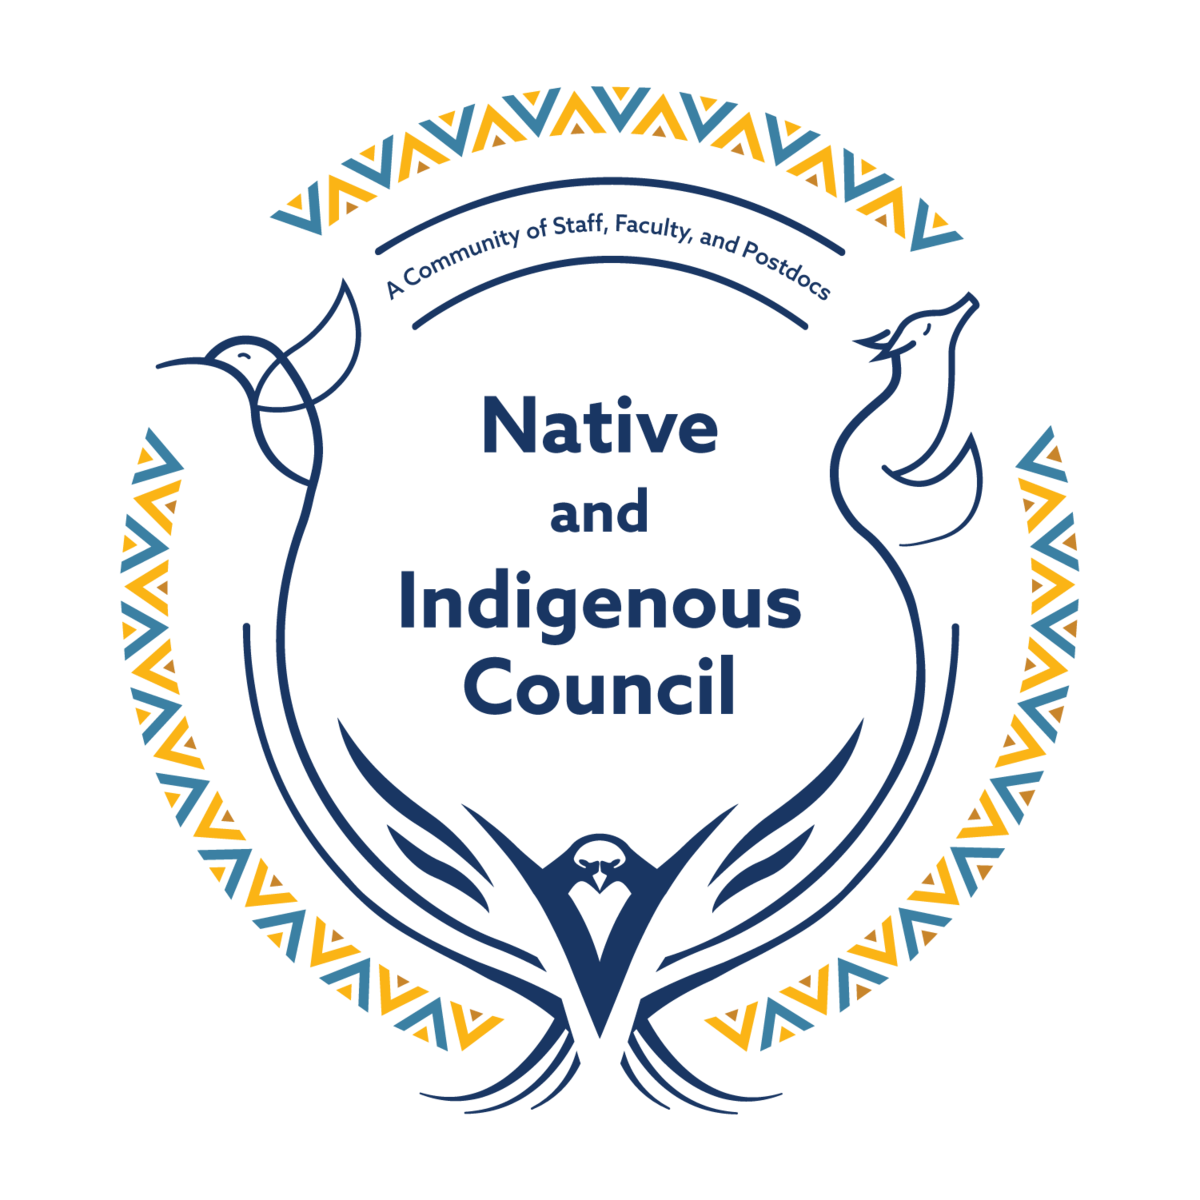 Native and Indigenous Council logo